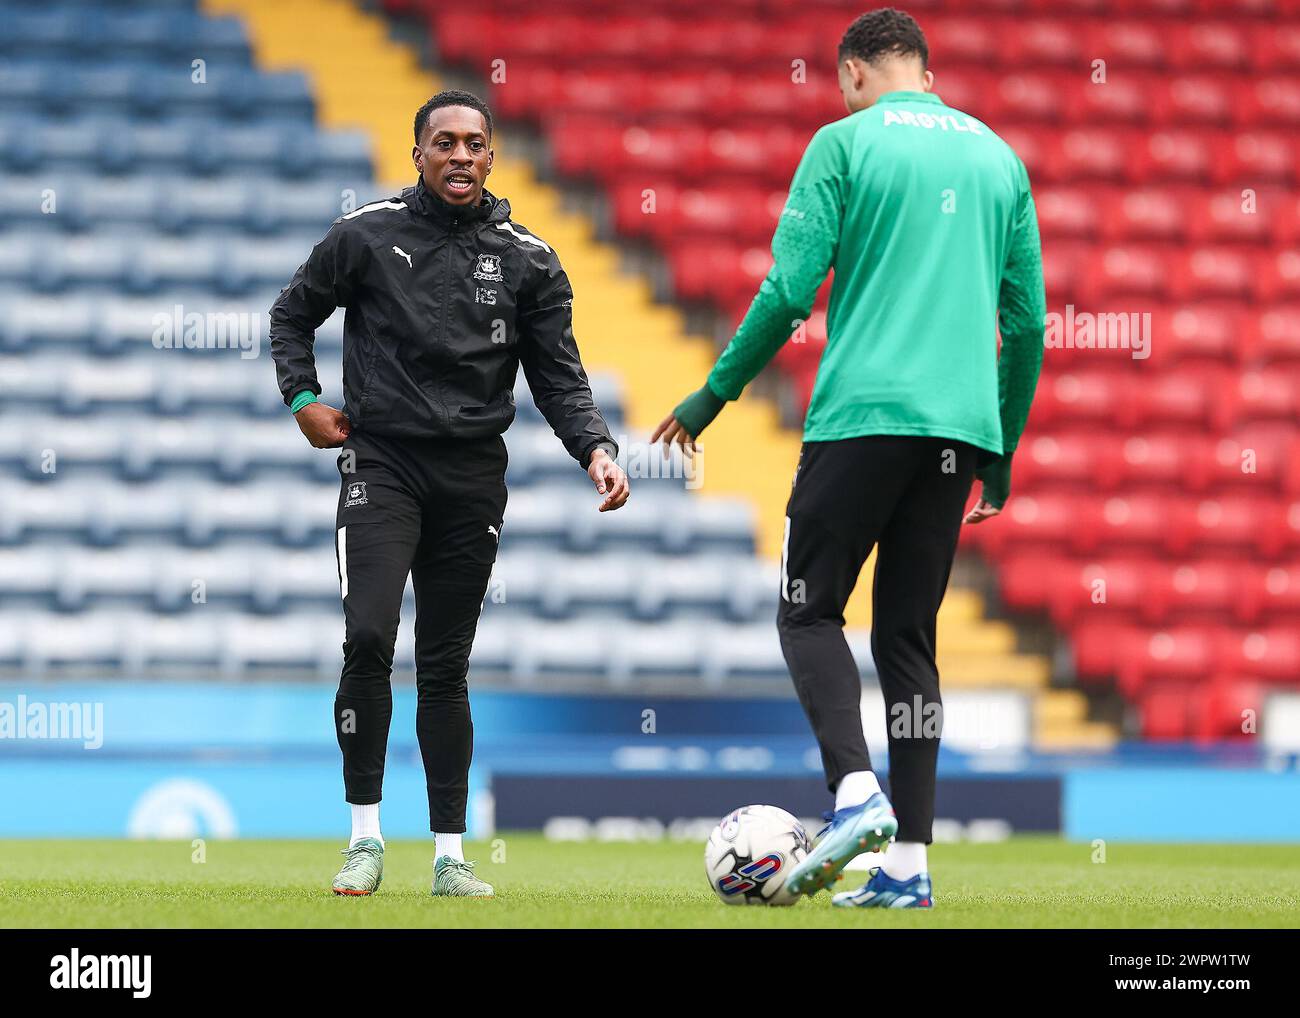 Mickel Miller of Plymouth Argyle warming up during the Sky Bet Championship match Blackburn Rovers vs Plymouth Argyle at Ewood Park, Blackburn, United Kingdom, 9th March 2024 (Photo by Stan Kasala/News Images) in, on 3/9/2024. (Photo by Stan Kasala/News Images/Sipa USA) Credit: Sipa USA/Alamy Live News Stock Photo